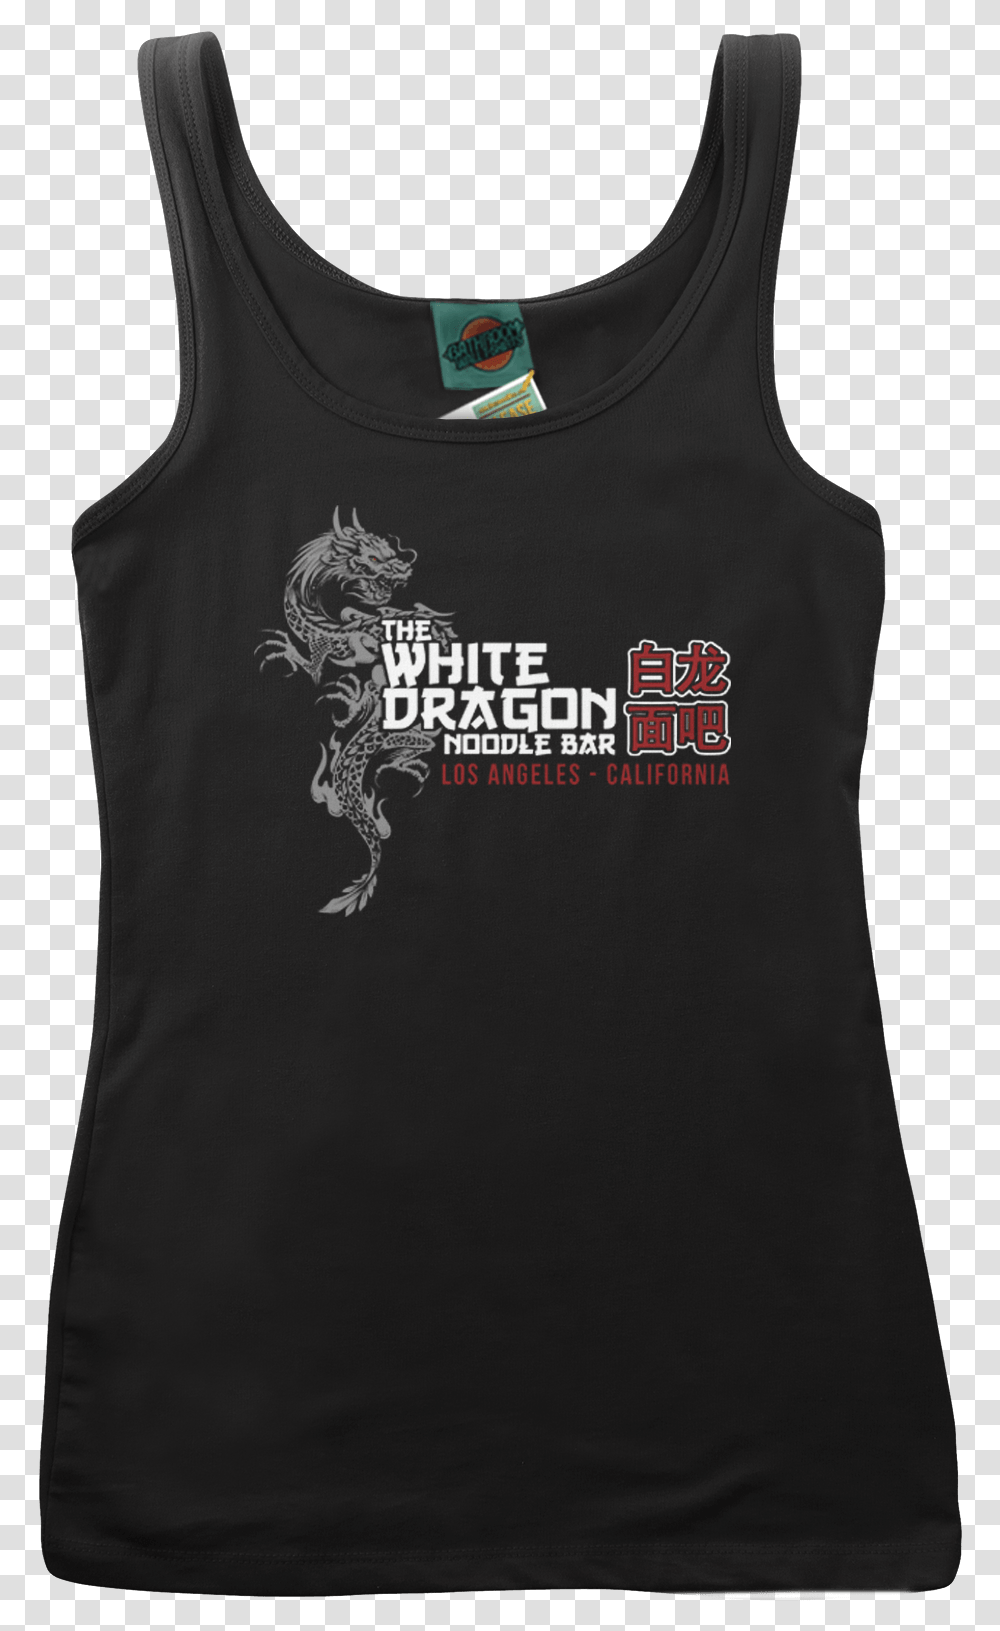 Blade Runner Movie Inspired White Dragon Noodle Bar T Shirt Dinos Bar And Grill Shirts, Clothing, Apparel, Tank Top, T-Shirt Transparent Png